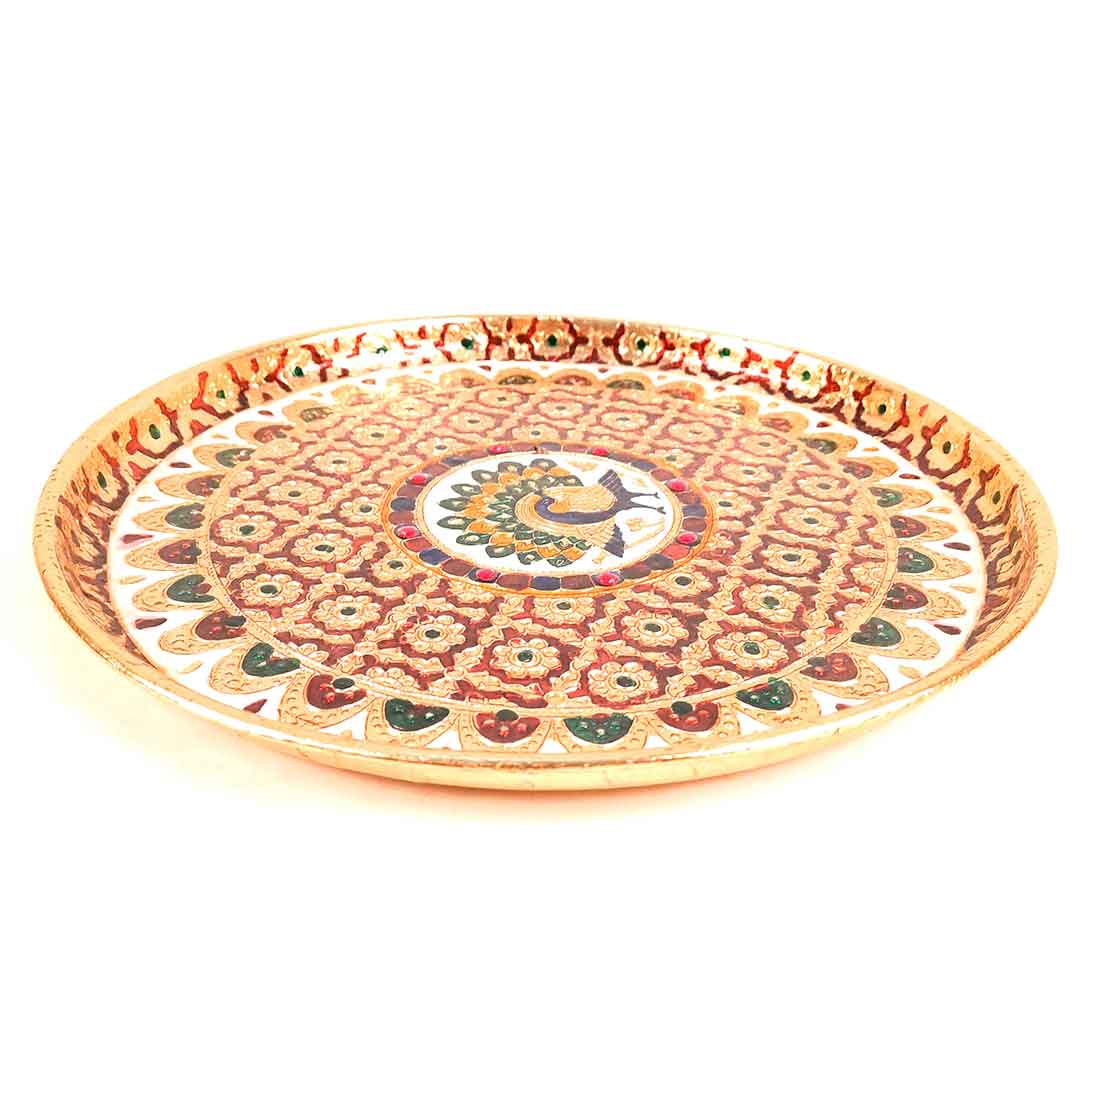 Meenakari Puja Thali - Shubh Labh Design - For For Pooja, Weddings & Festivals - 12 Inch #style_Peacock